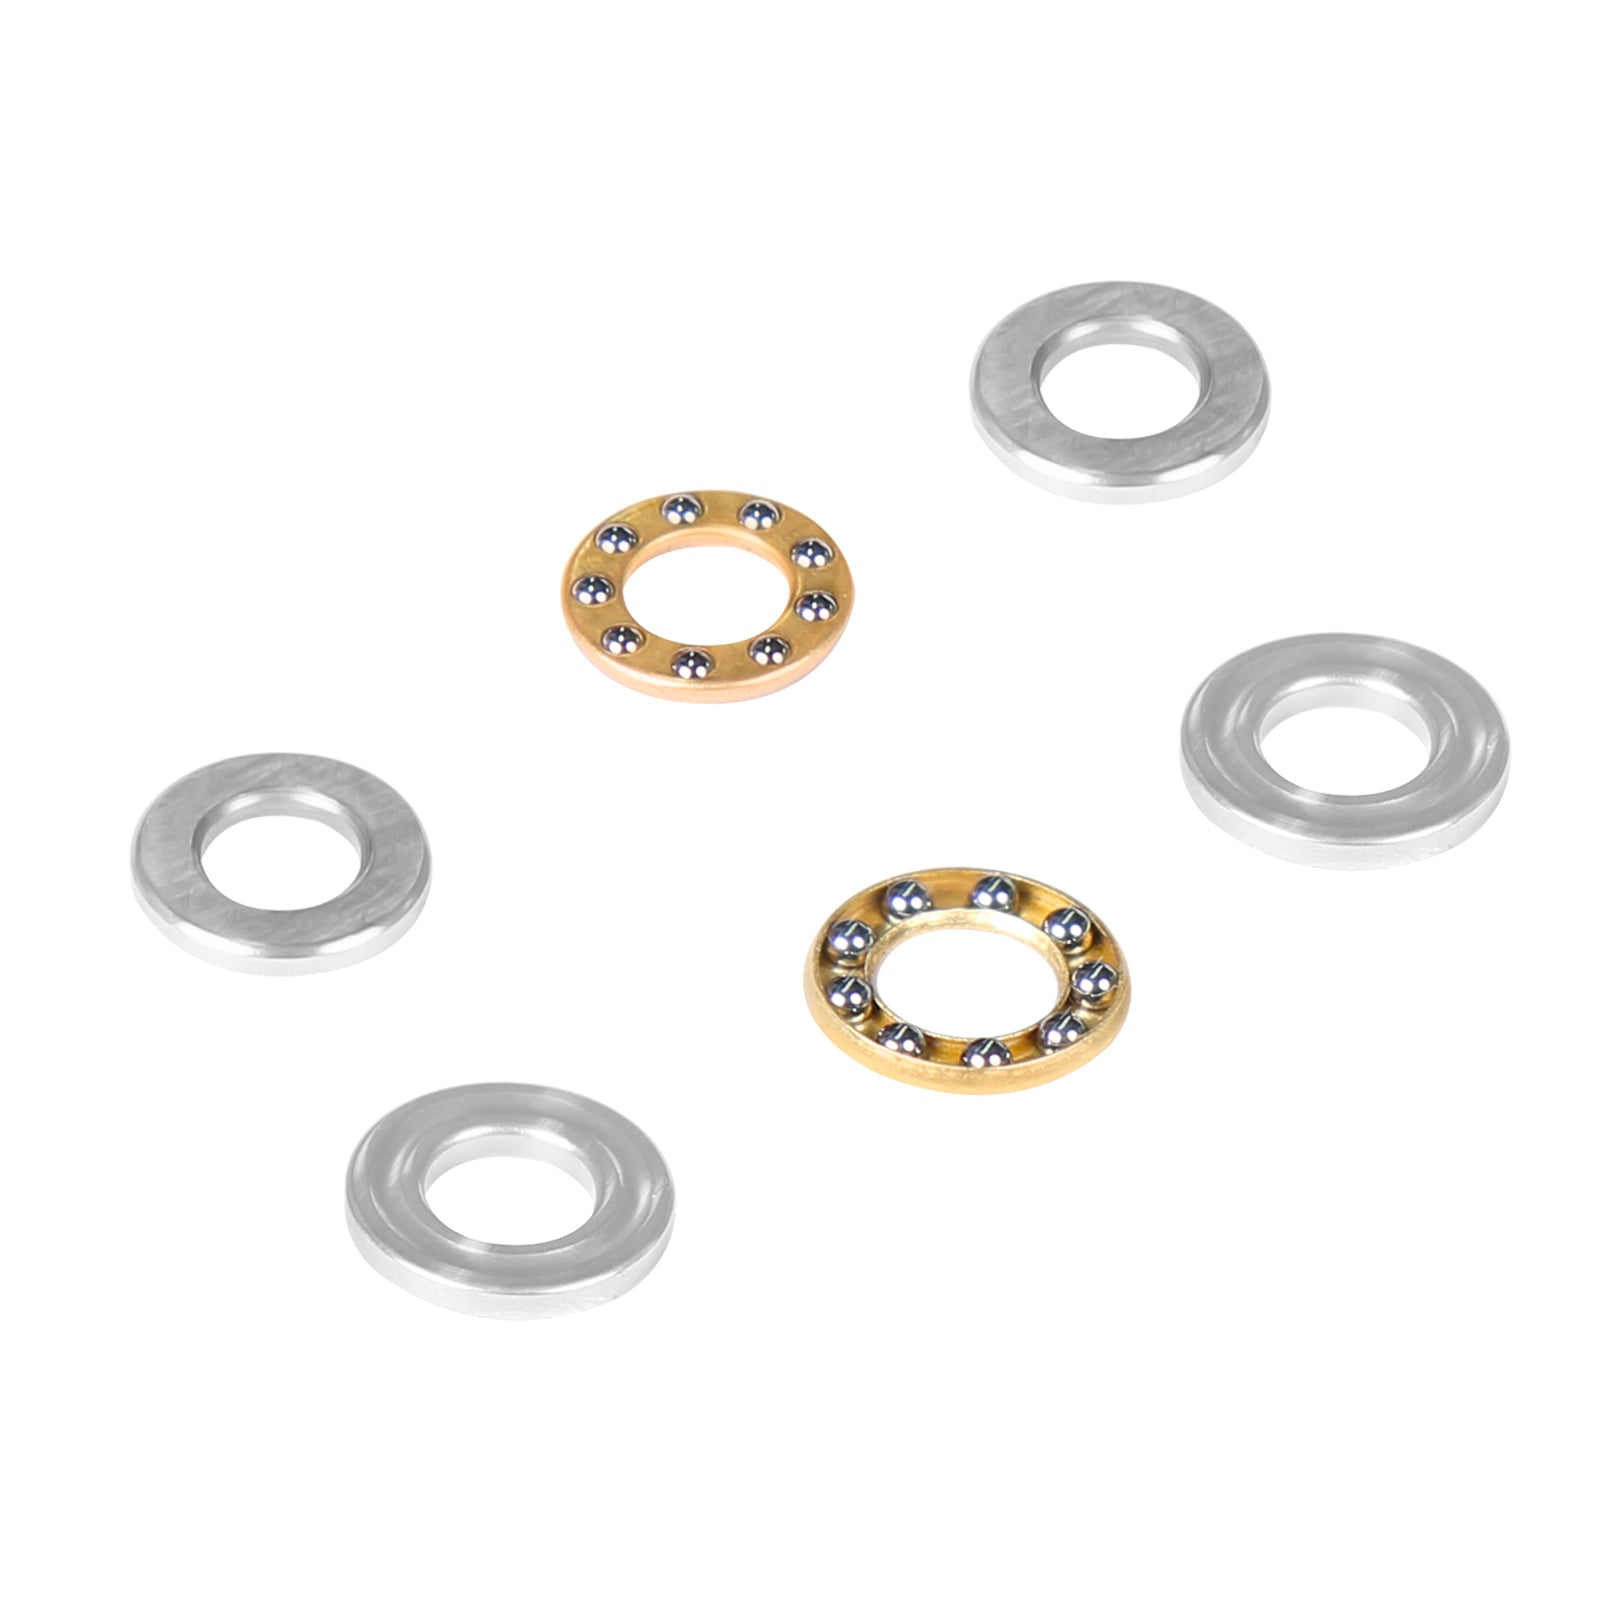 OMP HOBBY M7 Helicopter Parts Axial Bearing _5x_10x4 OSHM7156